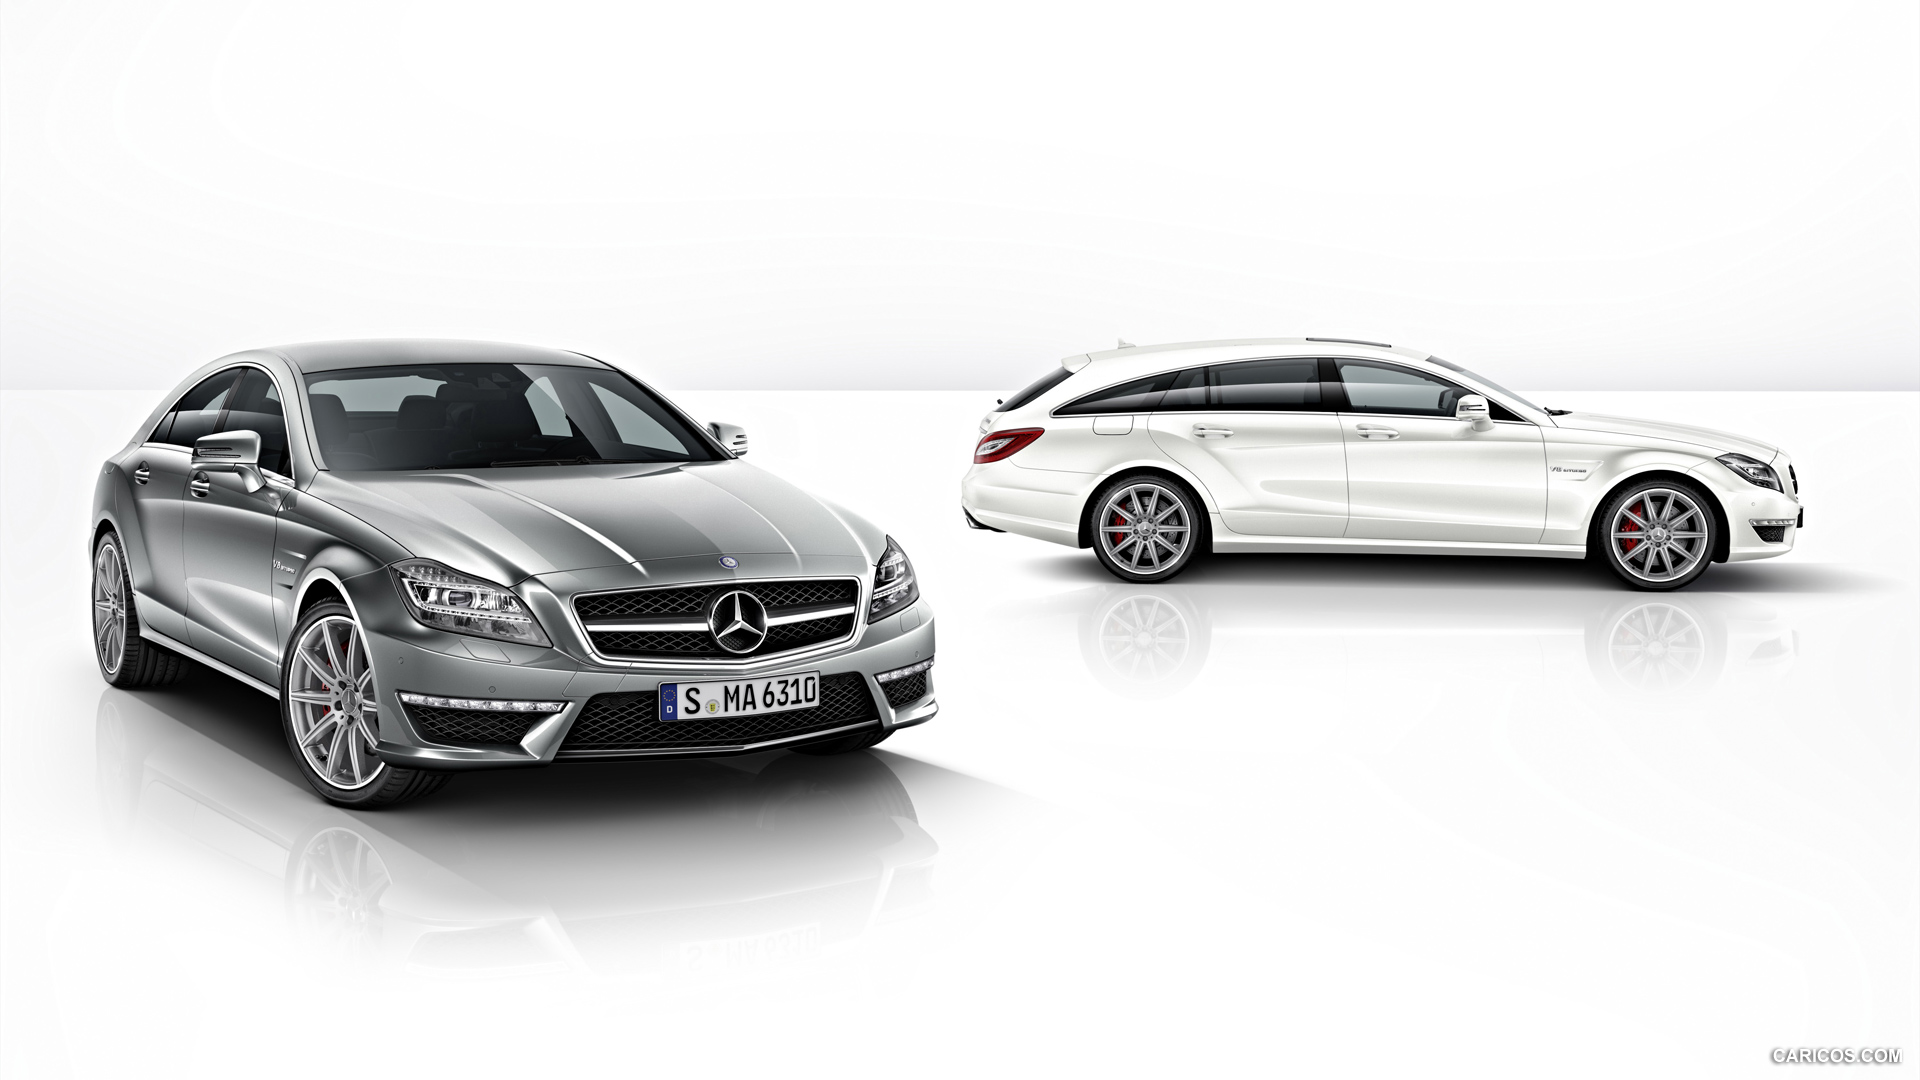 2014 Mercedes-Benz CLS 63 AMG Coupe and Shooting Brake S-Models - , #1 of 16